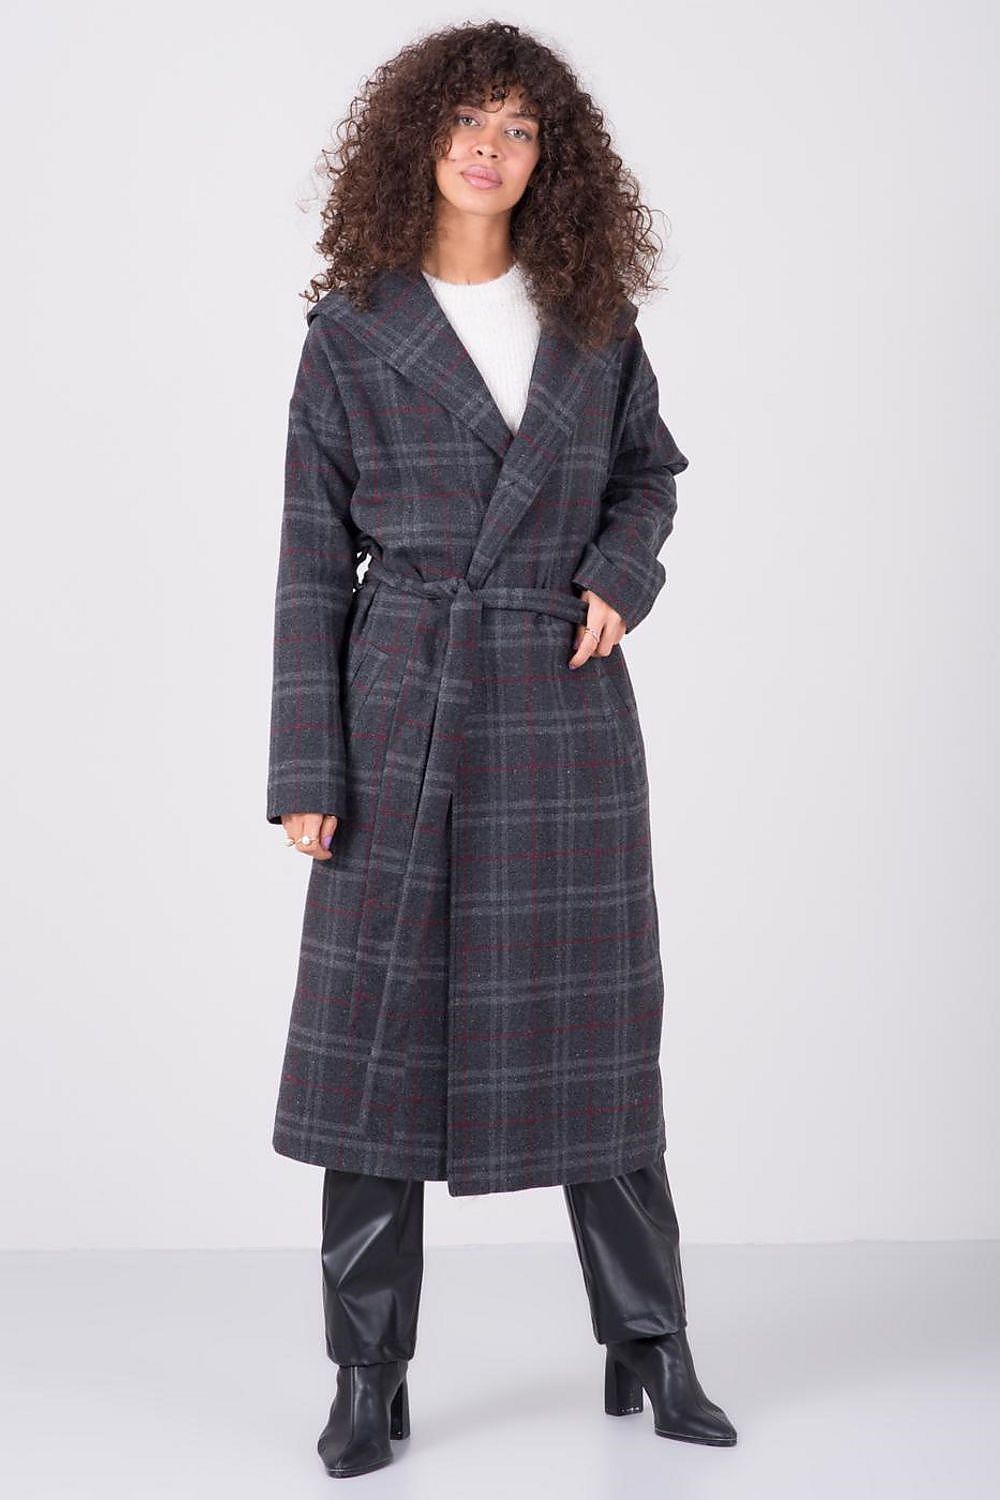 Coat Model 160268 by Sally Fashion - LOLA LUXE